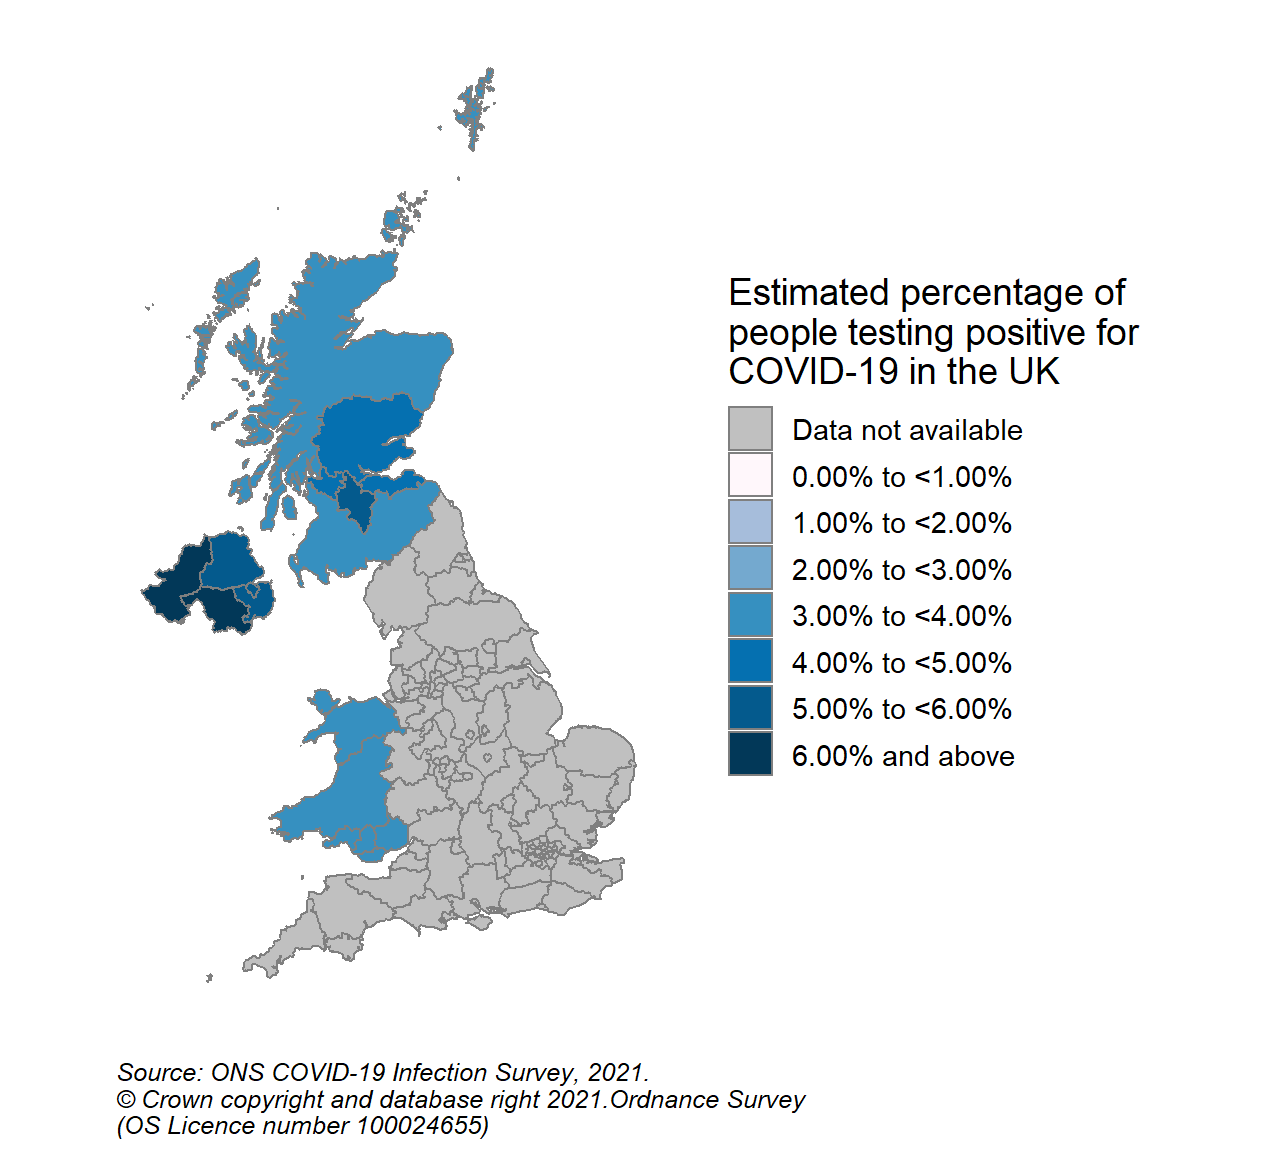 This colour coded map of the UK shows the modelled estimates of the percentage of the private residential population testing positive for COVID-19, by COVID-19 Infection Survey sub-regions. In Scotland, these sub-regions are comprised of Health Boards. The regions are: 123 - NHS Grampian, NHS Highland, NHS Orkney, NHS Shetland and NHS Western Isles, 124 - NHS Fife, NHS Forth Valley and NHS Tayside, 125 - NHS Greater Glasgow & Clyde, 126 - NHS Lothian, 127 - NHS Lanarkshire, 128 - NHS Ayrshire & Arran, NHS Borders and NHS Dumfries & Galloway.  The sub-region with the highest modelled estimate for the percentage of people testing positive was CIS Region 127 (NHS Lanarkshire) at 5.66% (95% credible interval: 4.83% to 6.67%).  The sub-region with the lowest modelled estimate was Region 123 (NHS Grampian, NHS Highland, NHS Orkney, NHS Shetland and NHS Western Isles), at 3.03% (95% credible interval: 2.52% to 3.63%).  We have not included sub-regional data for England in the map this week because data for England is going through additional quality assurance and has therefore not been updated. We have included updated data for Wales, Northern Ireland and Scotland as usual.